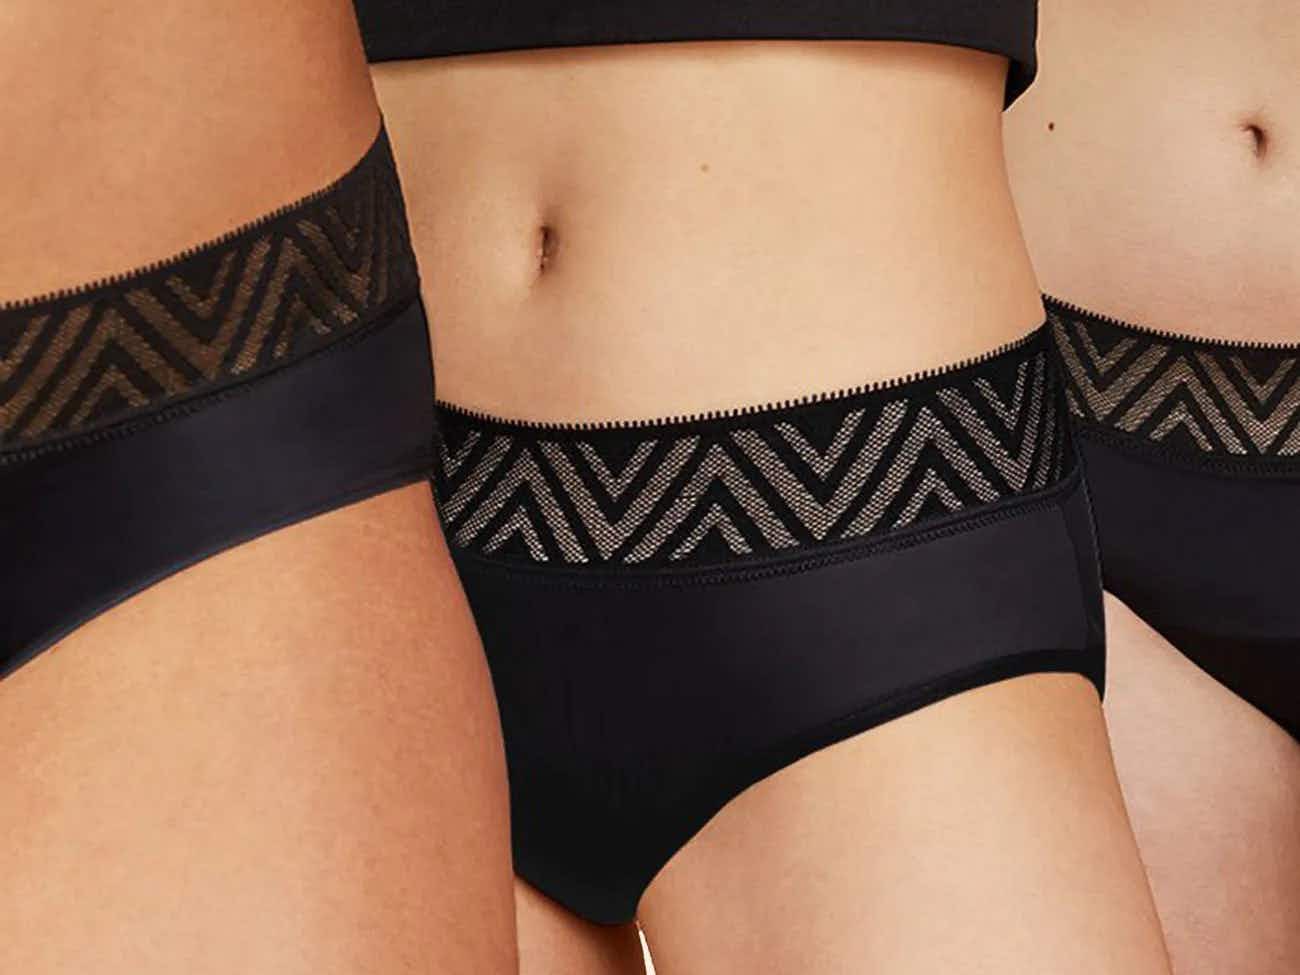 Claim $21 in the Thinx Underwear Class Action Settlement - Free